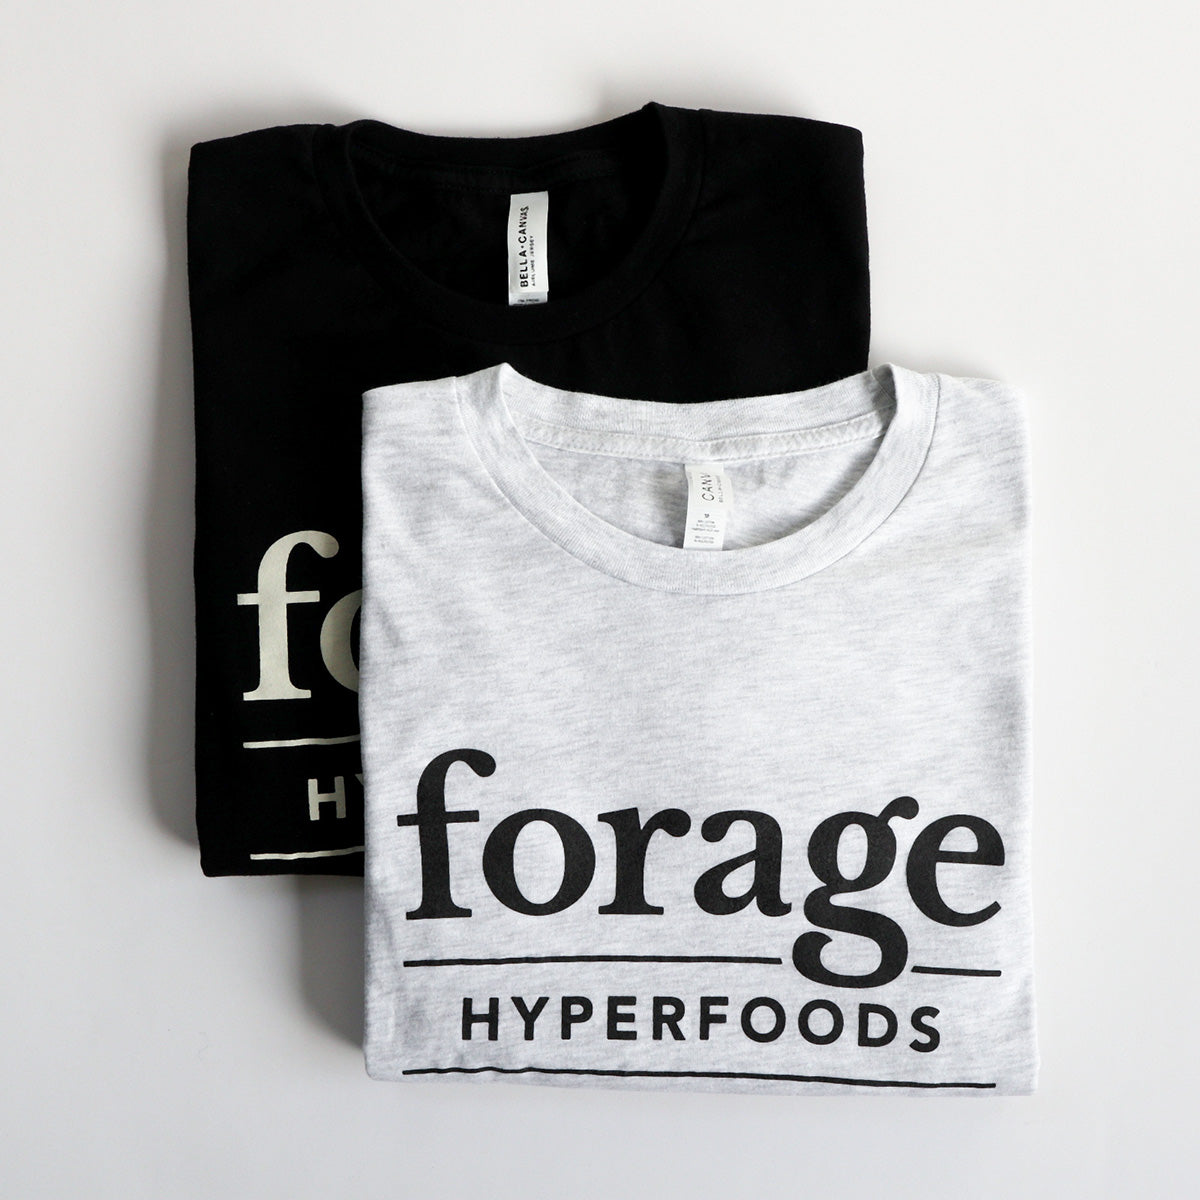 Two shirts with the word mark "Forage Hyperfoods" printed on them. The one in the foreground is a light gray colour with black text, the one in the background is black with white text.  